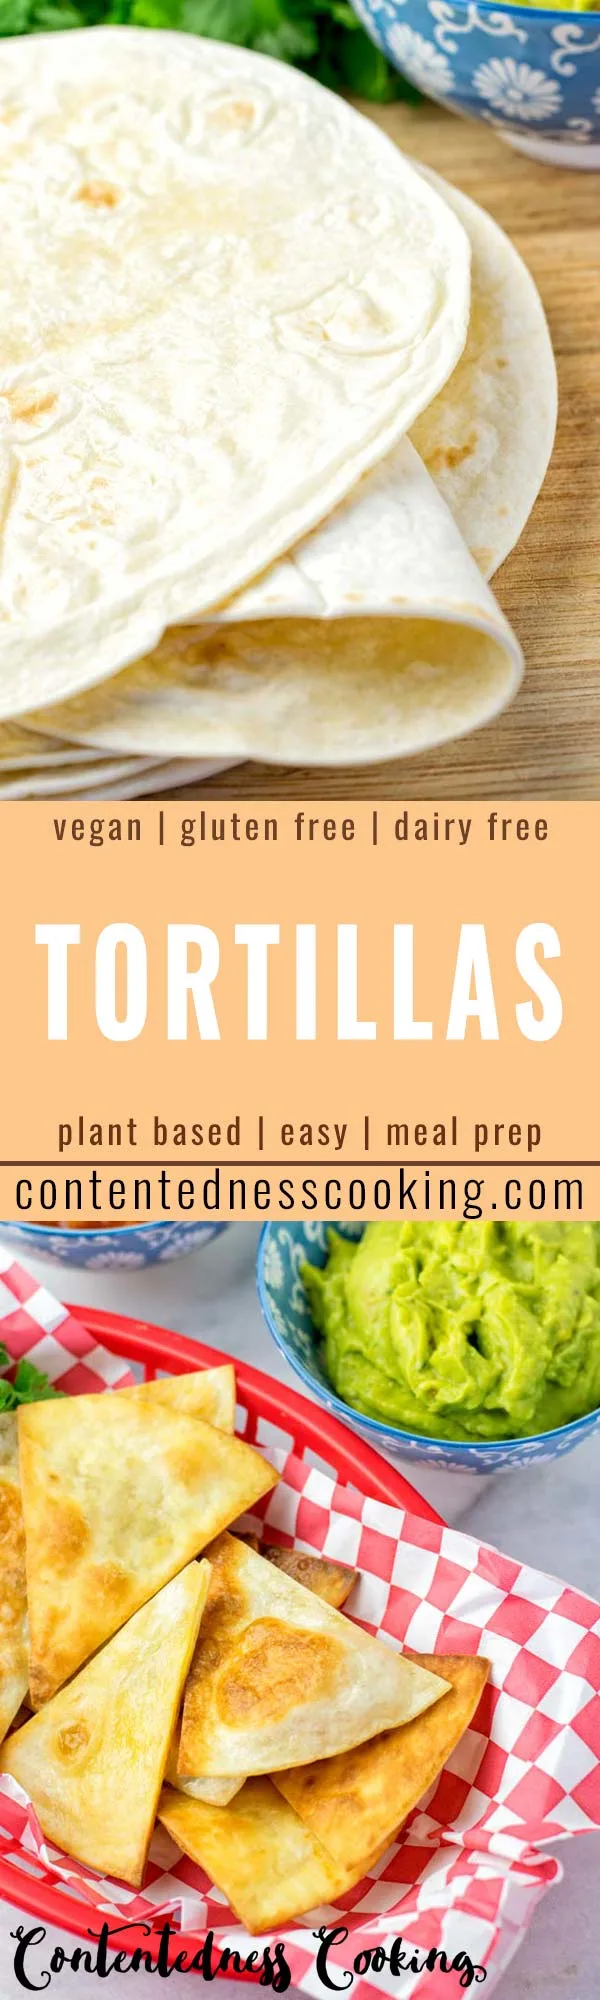 These Gluten Free Tortillas are made with only 2 ingredients and are vegan, too. Once you’ve tried these you expereince the easiest way to make homemade tortillas. A keeper that the whole family will love. Perfect for burritos, warps, any fillings, lunch, dinner, meal prep. #vegan #dairyfree #glutenfree #vegetarian #tortillas #homemade #dinner #lunch #budgetmeals #mealprep #worklunchideas #contentednesscooking #tacofilling